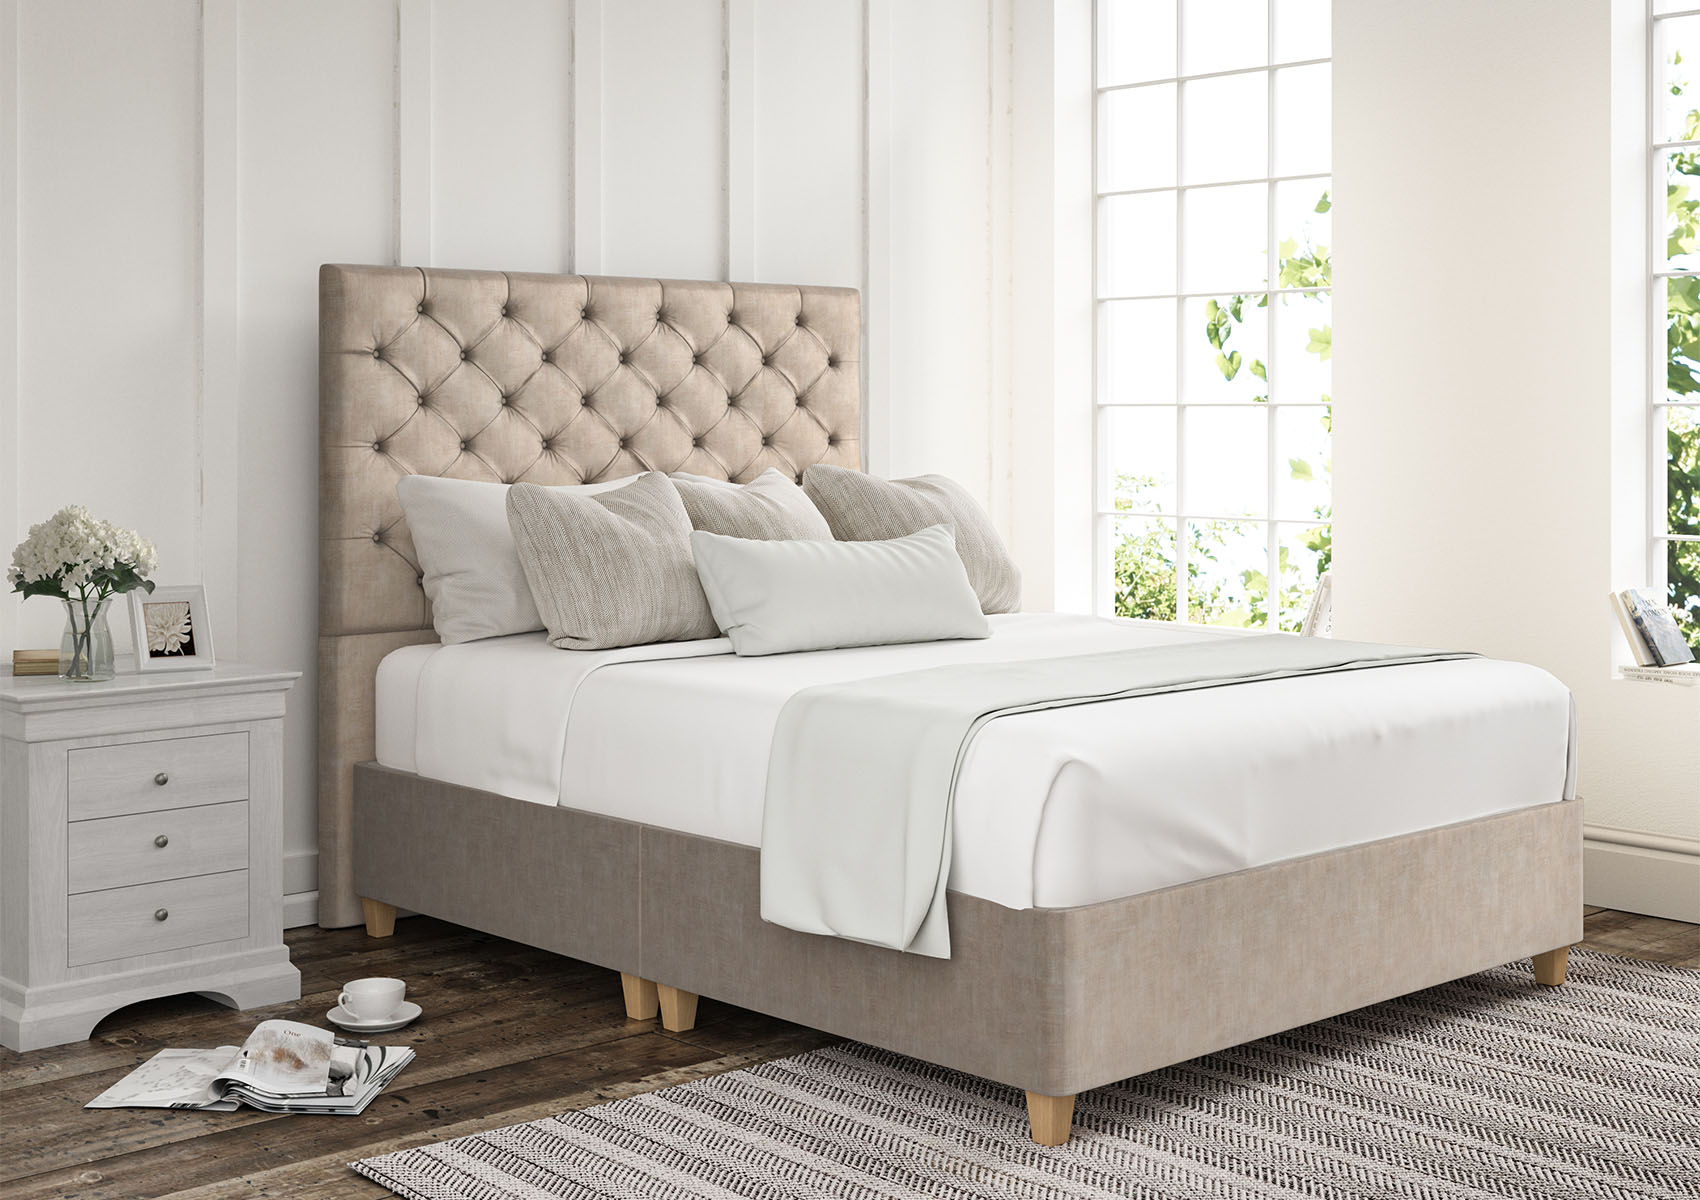 View Chesterfield Heritage Royal Upholstered Single Divan Bed Time4Sleep information